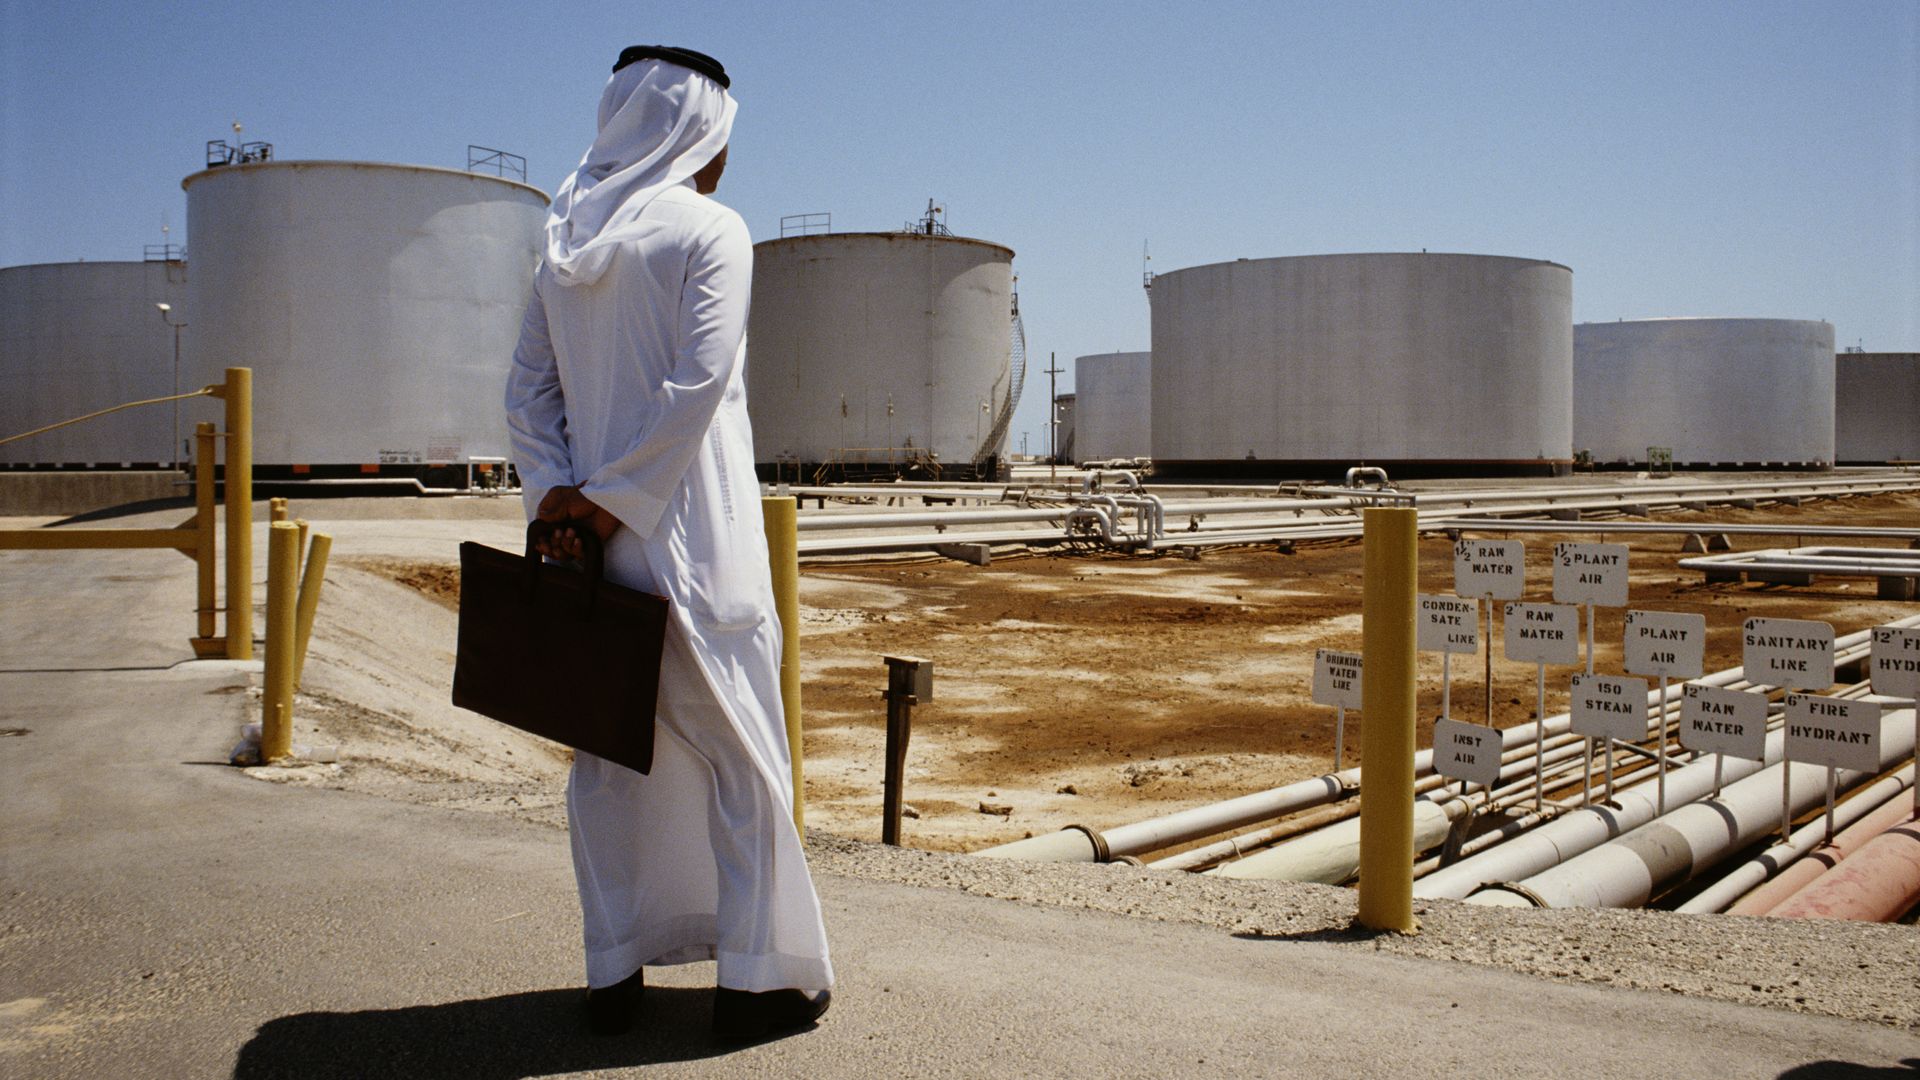 Photo of a Saudi man standing with a briefcase gazing at some Aramco refineries.